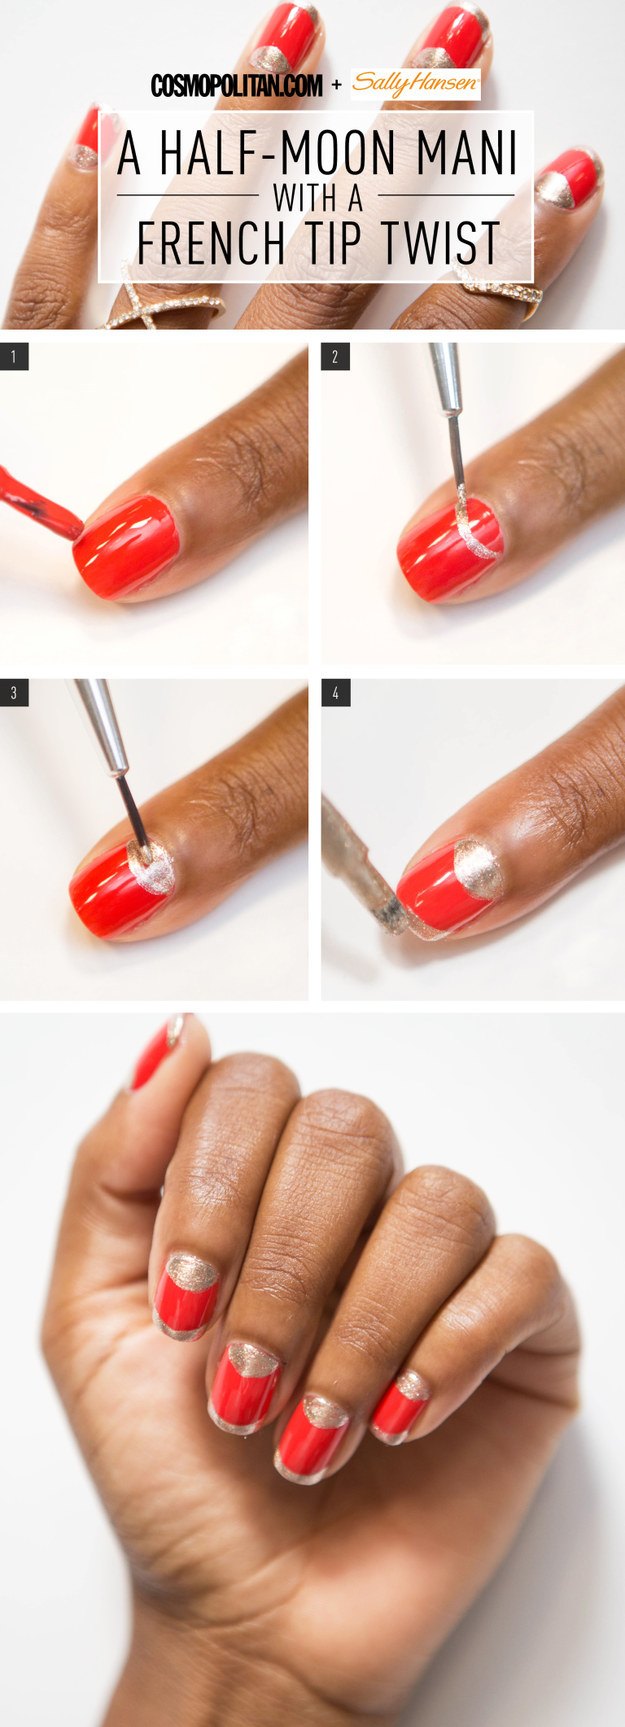 20 DIY Nail Tutorials You Need To Try 3